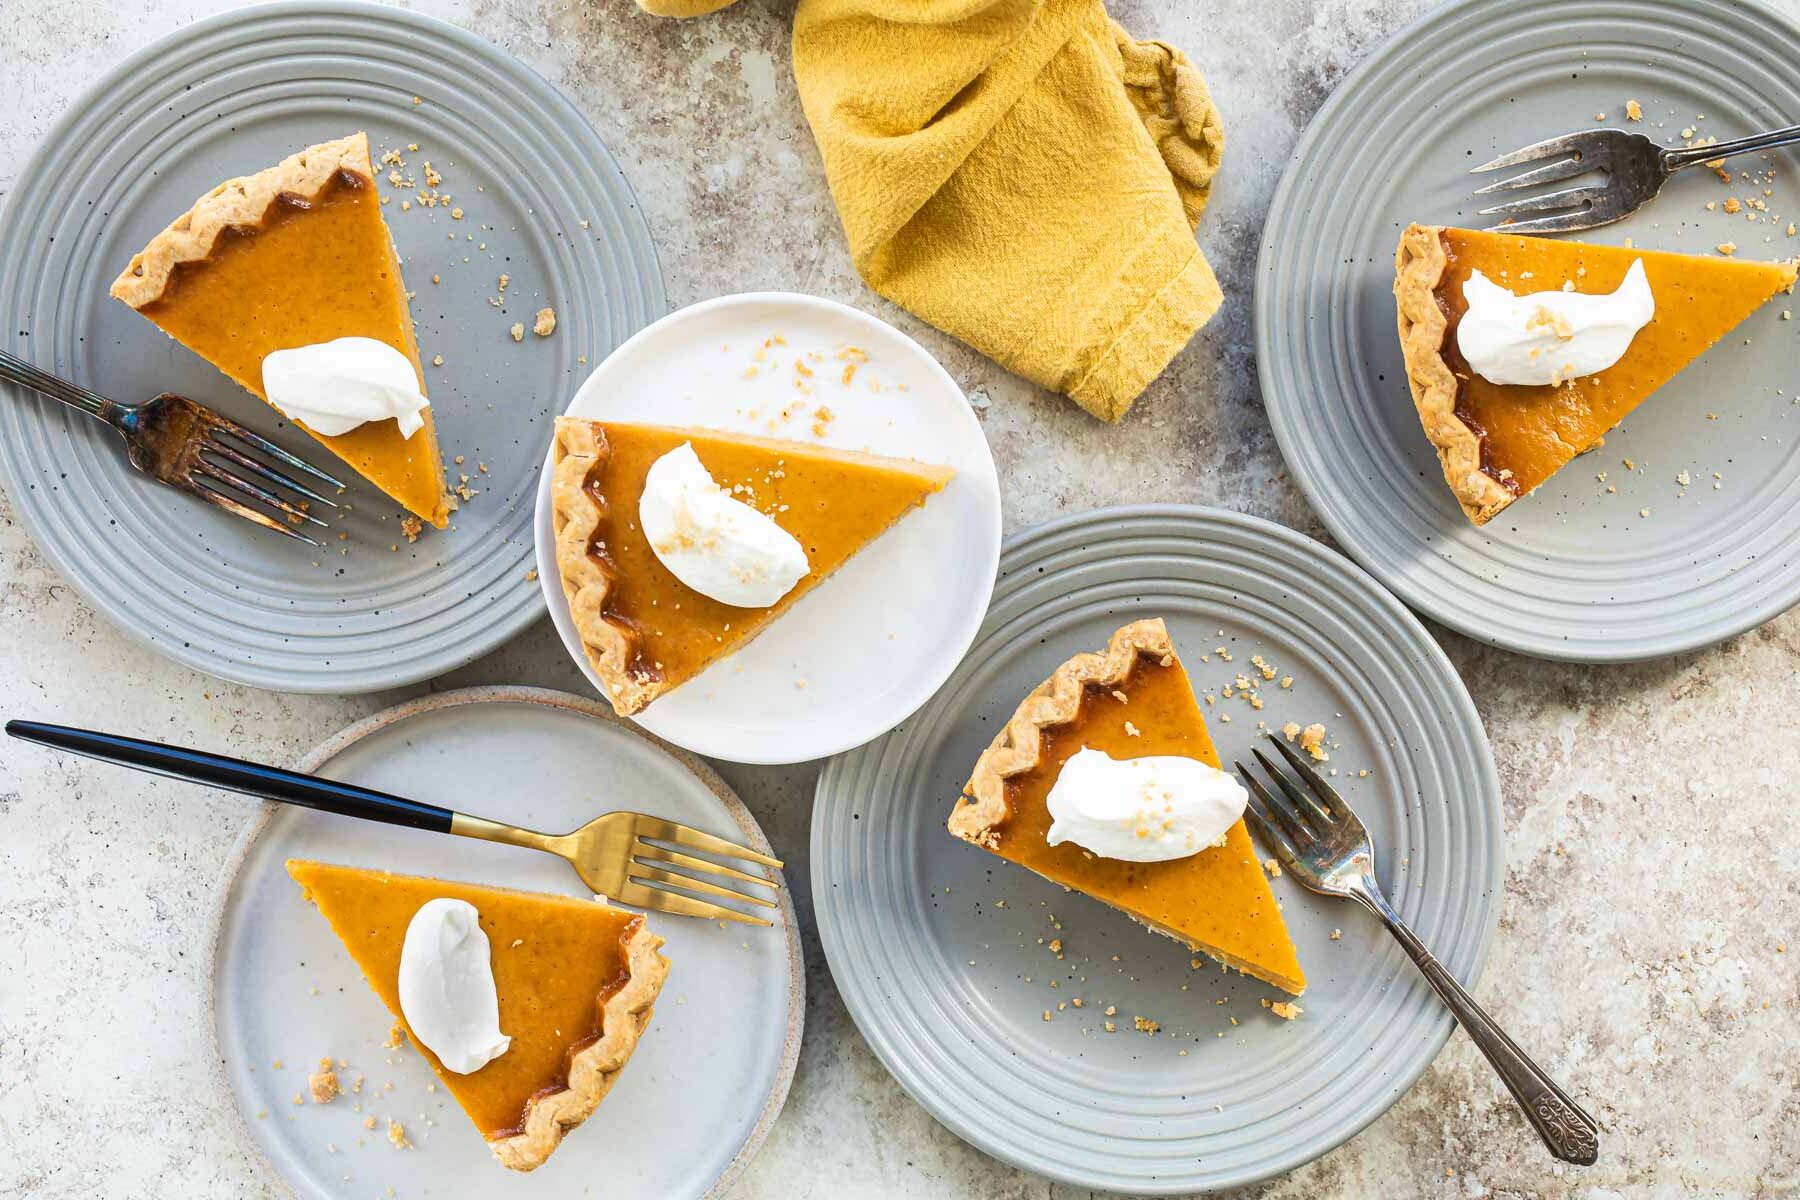 Slices of pumpkin pie on a white plate.